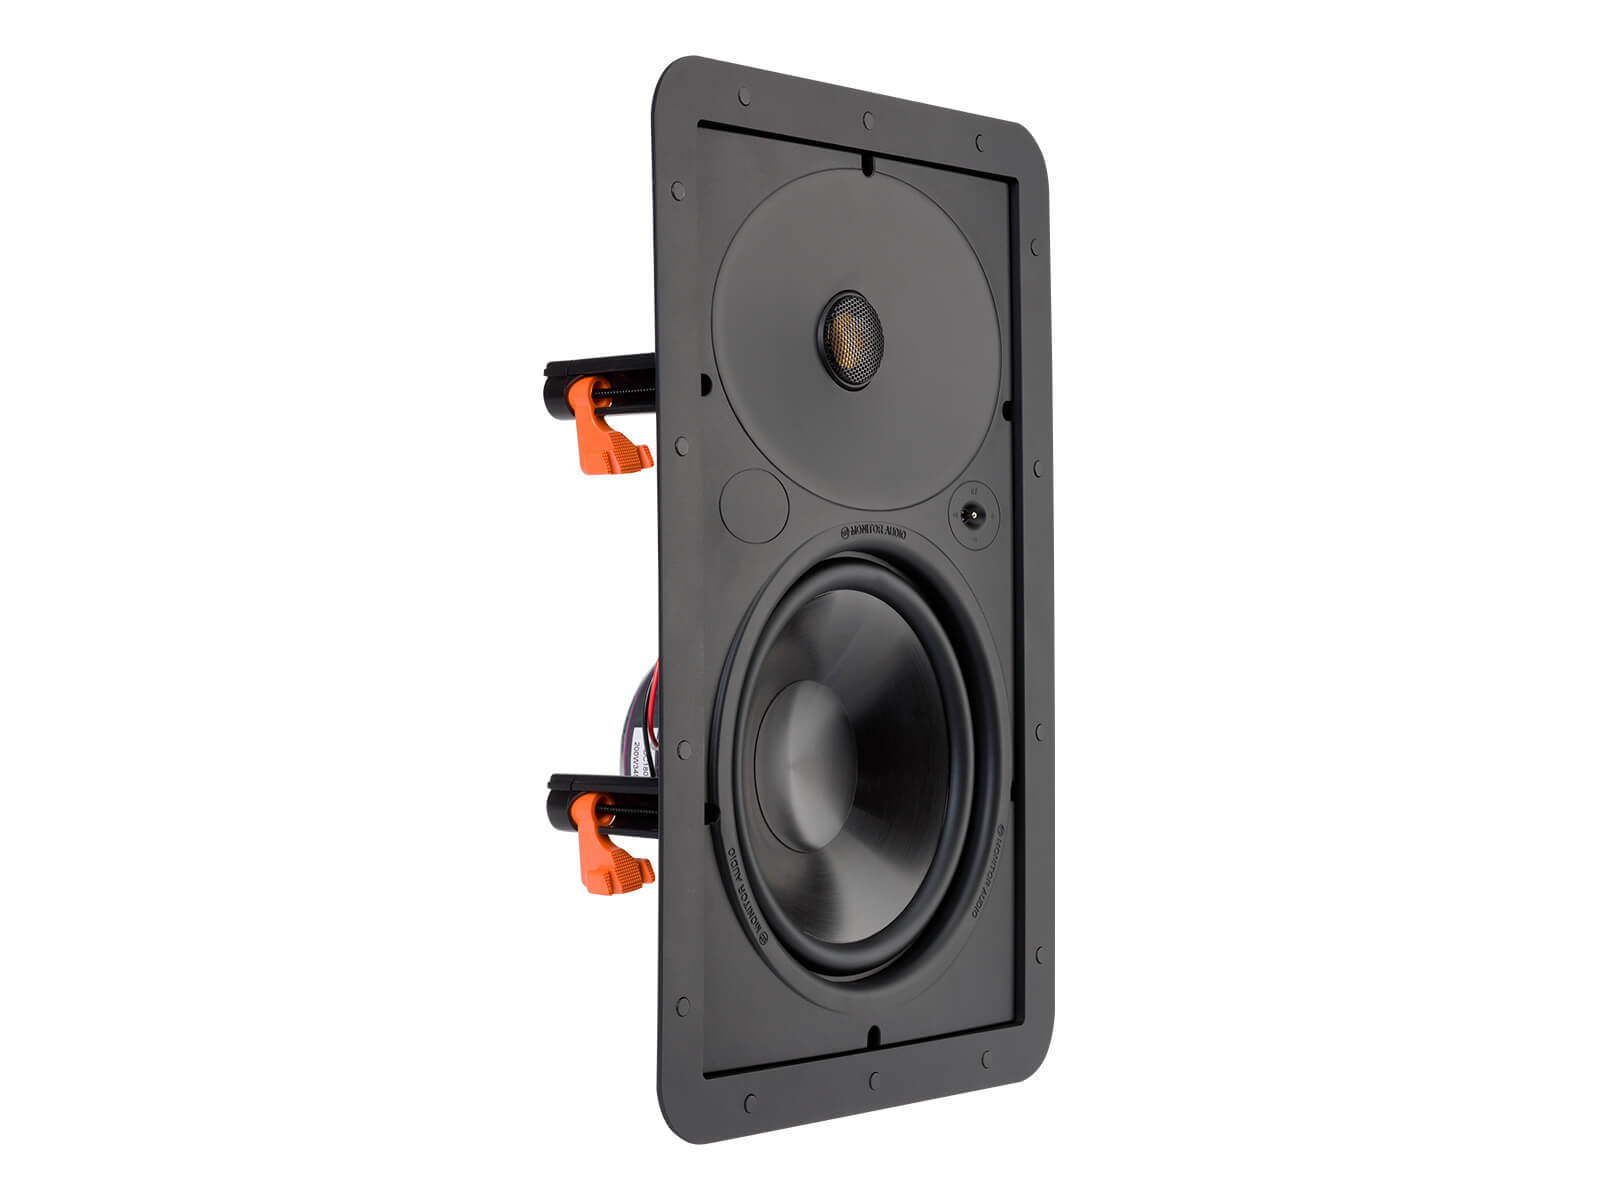 Core W180, front ISO, grille-less in-wall speakers.